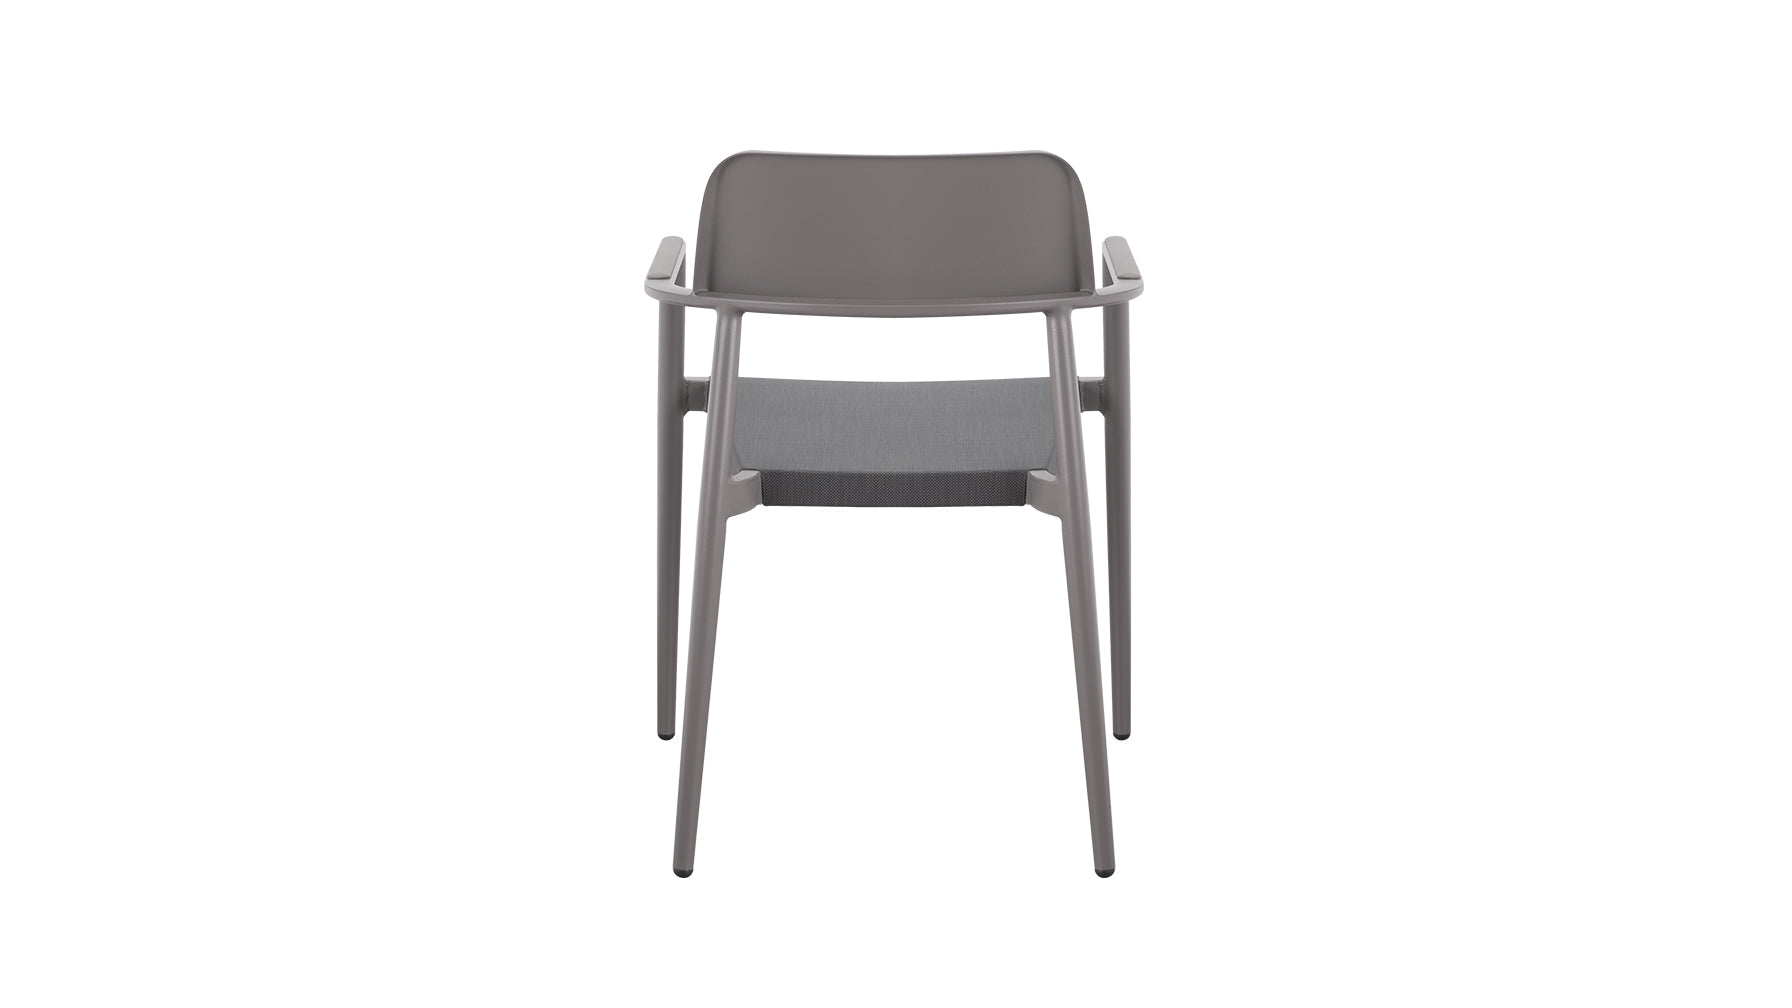 Best Of Me Outdoor Dining Chair (Set of Two), Pewter - Image 5